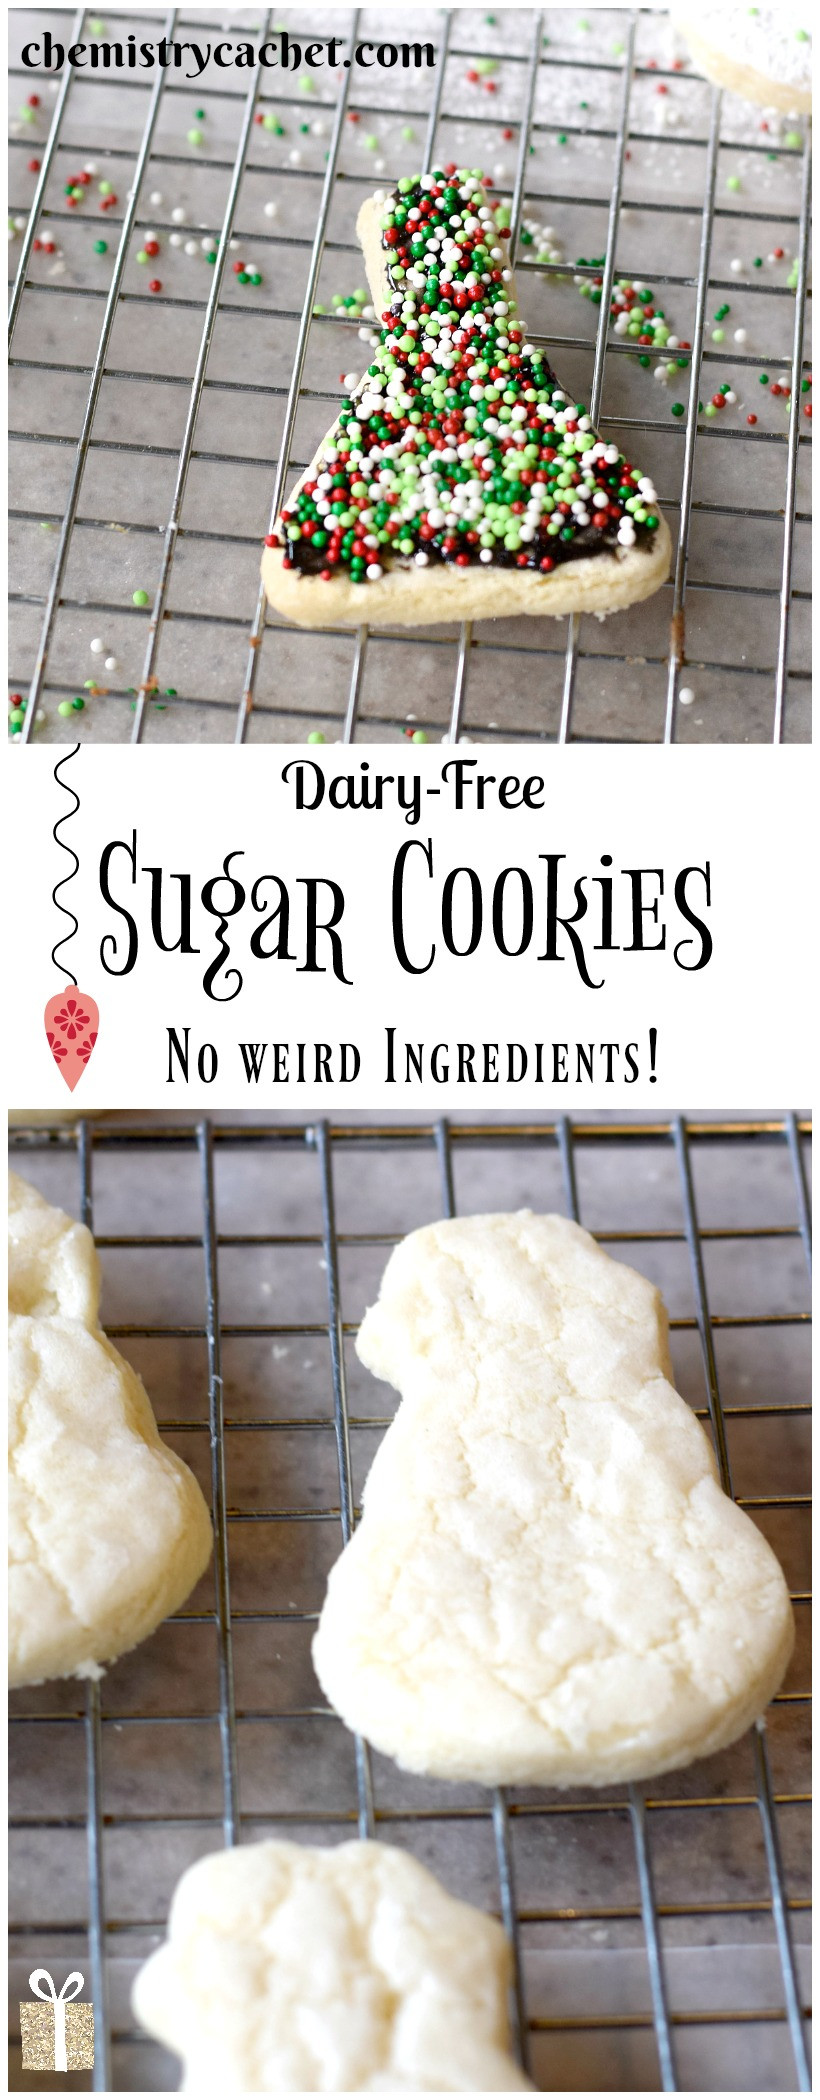 Dairy Free Sugar Cookies
 Foolproof Dairy Free Sugar Cookies Perfect for Cut Outs